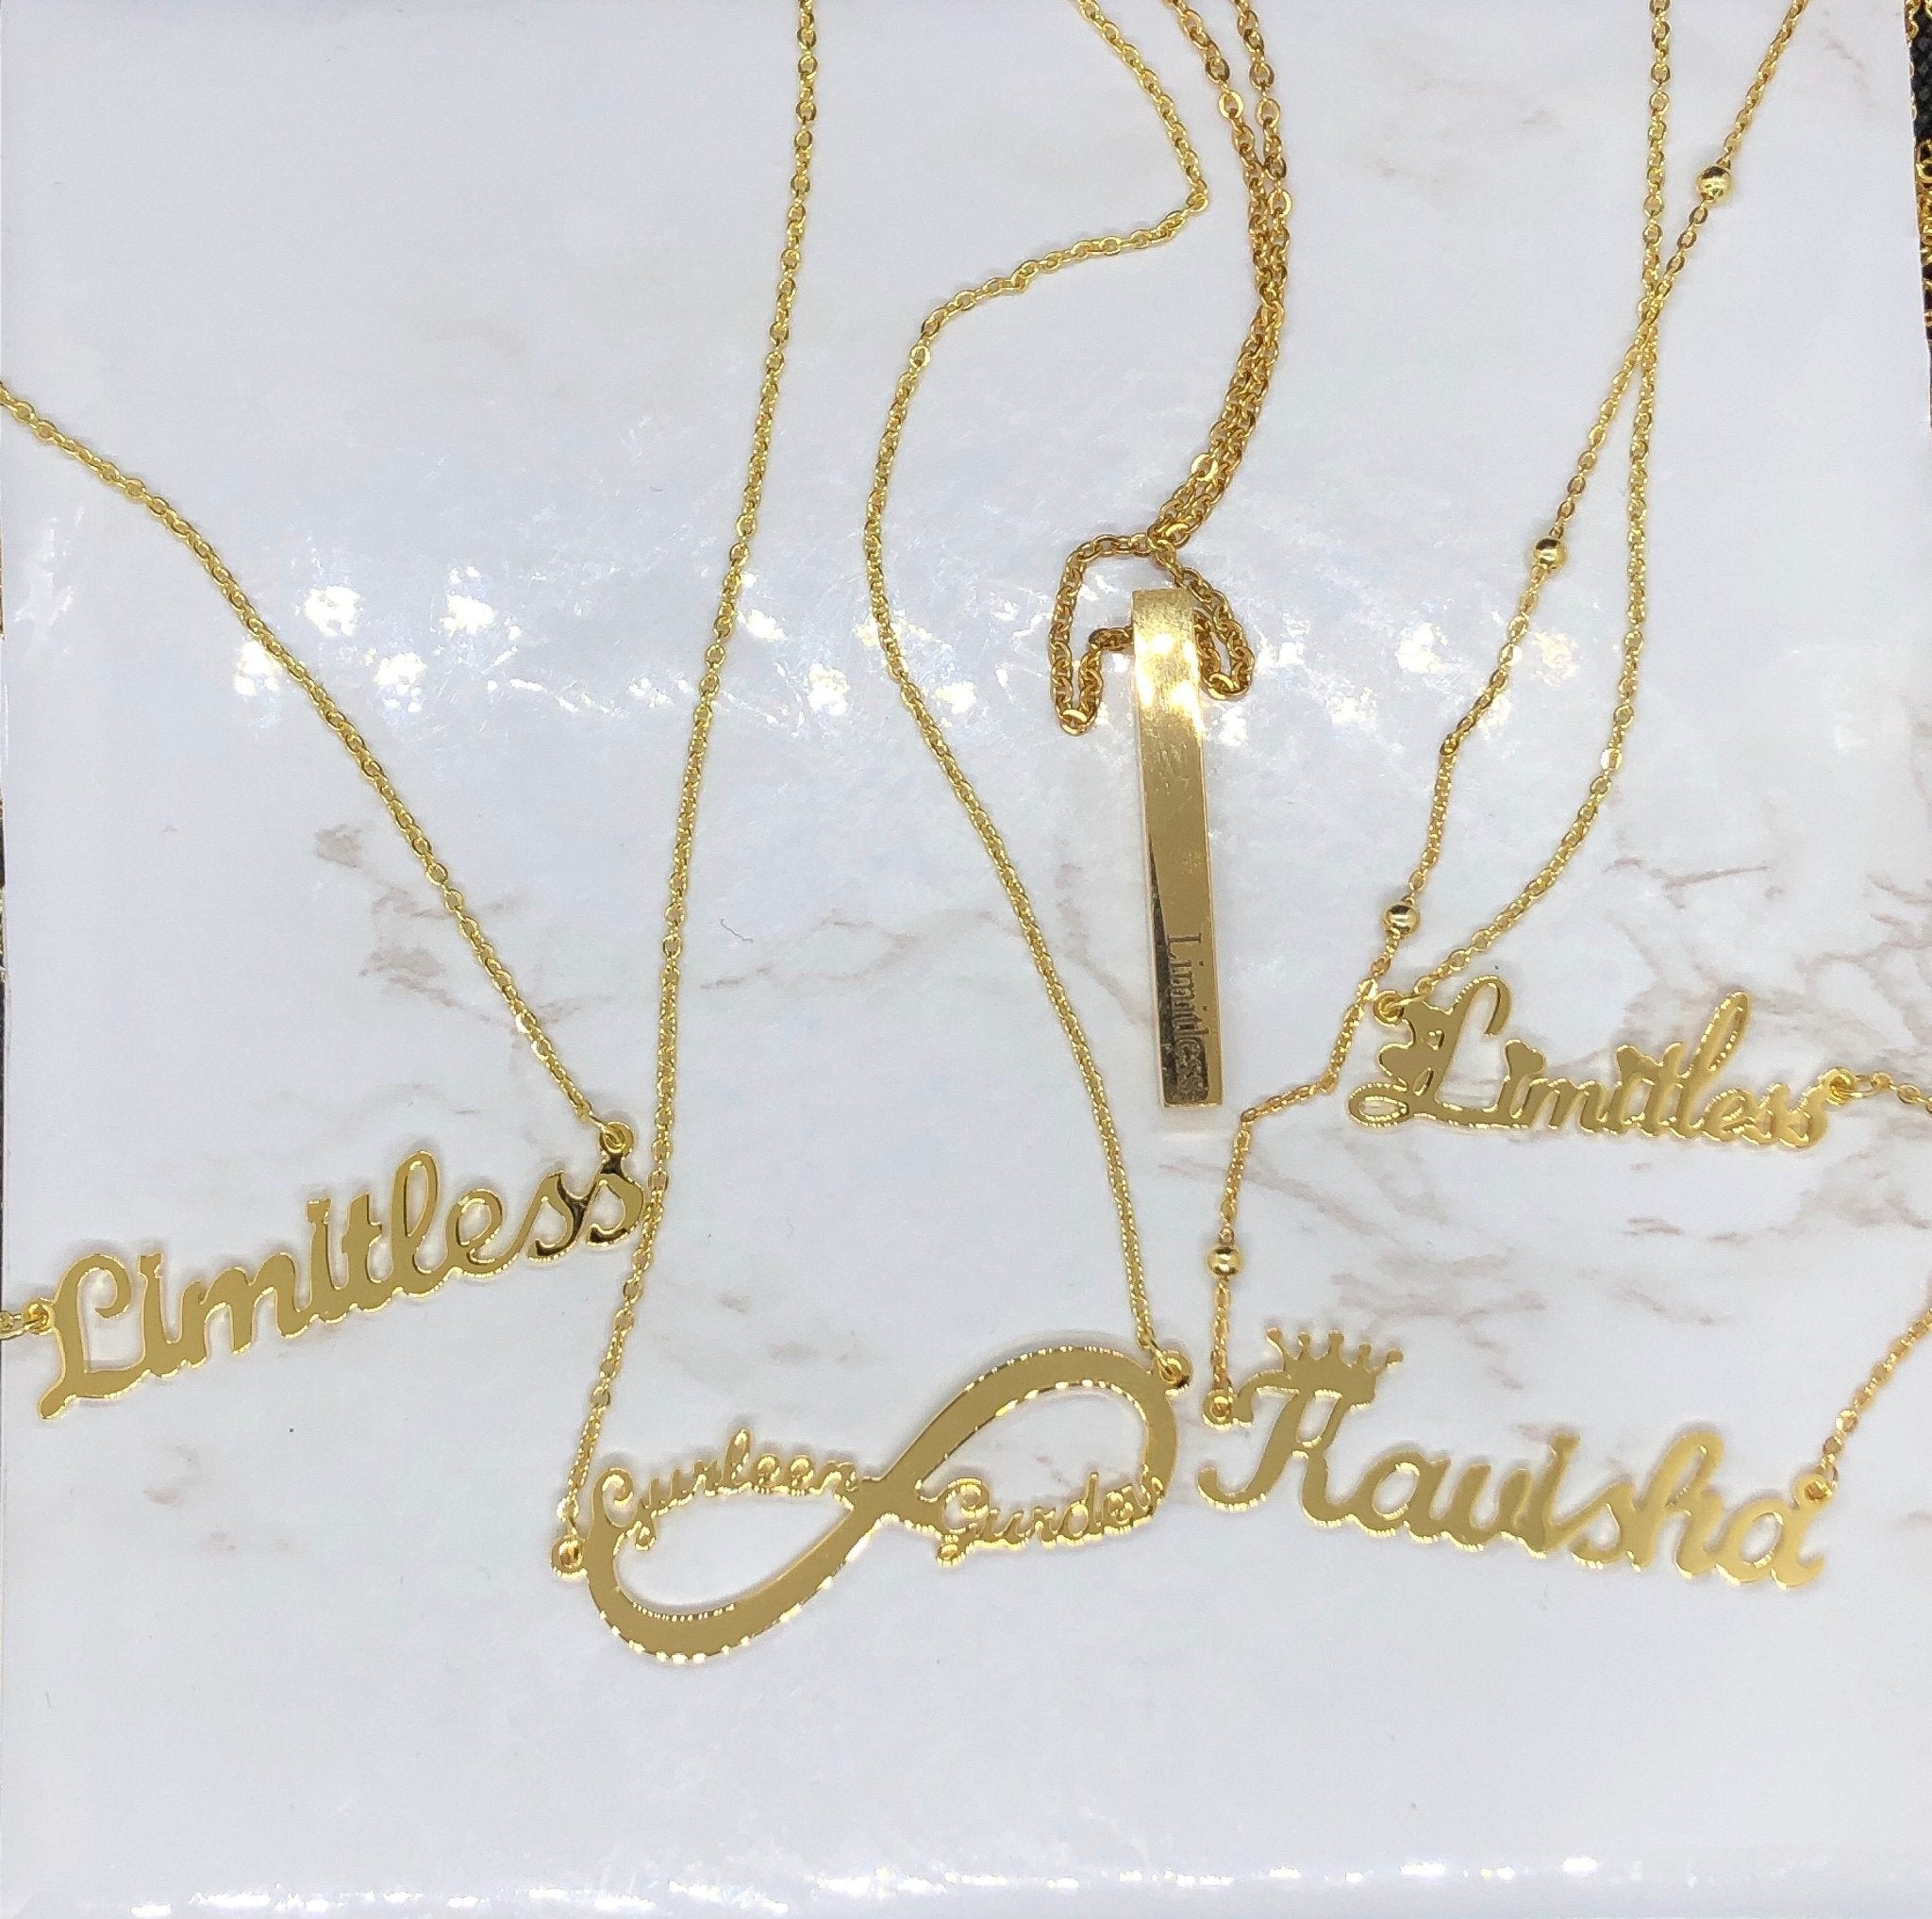 Limitless Jewellery Custom Chains Online - Limitless Jewellery